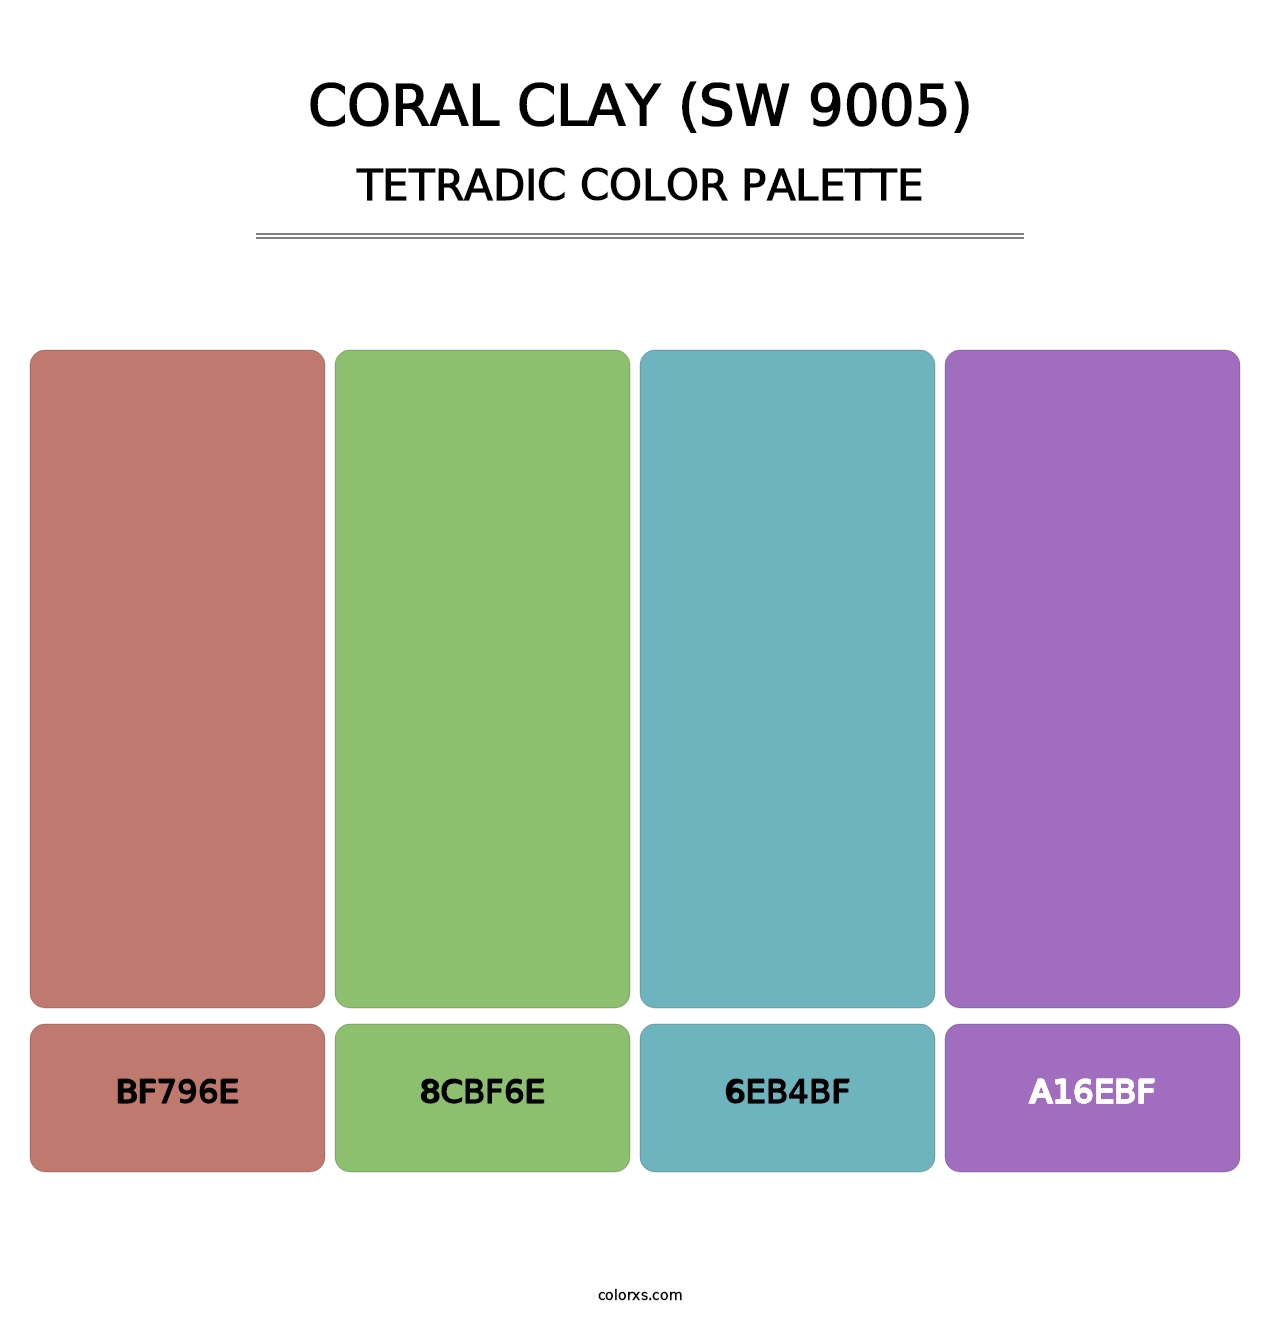 Coral Clay (SW 9005) - Tetradic Color Palette